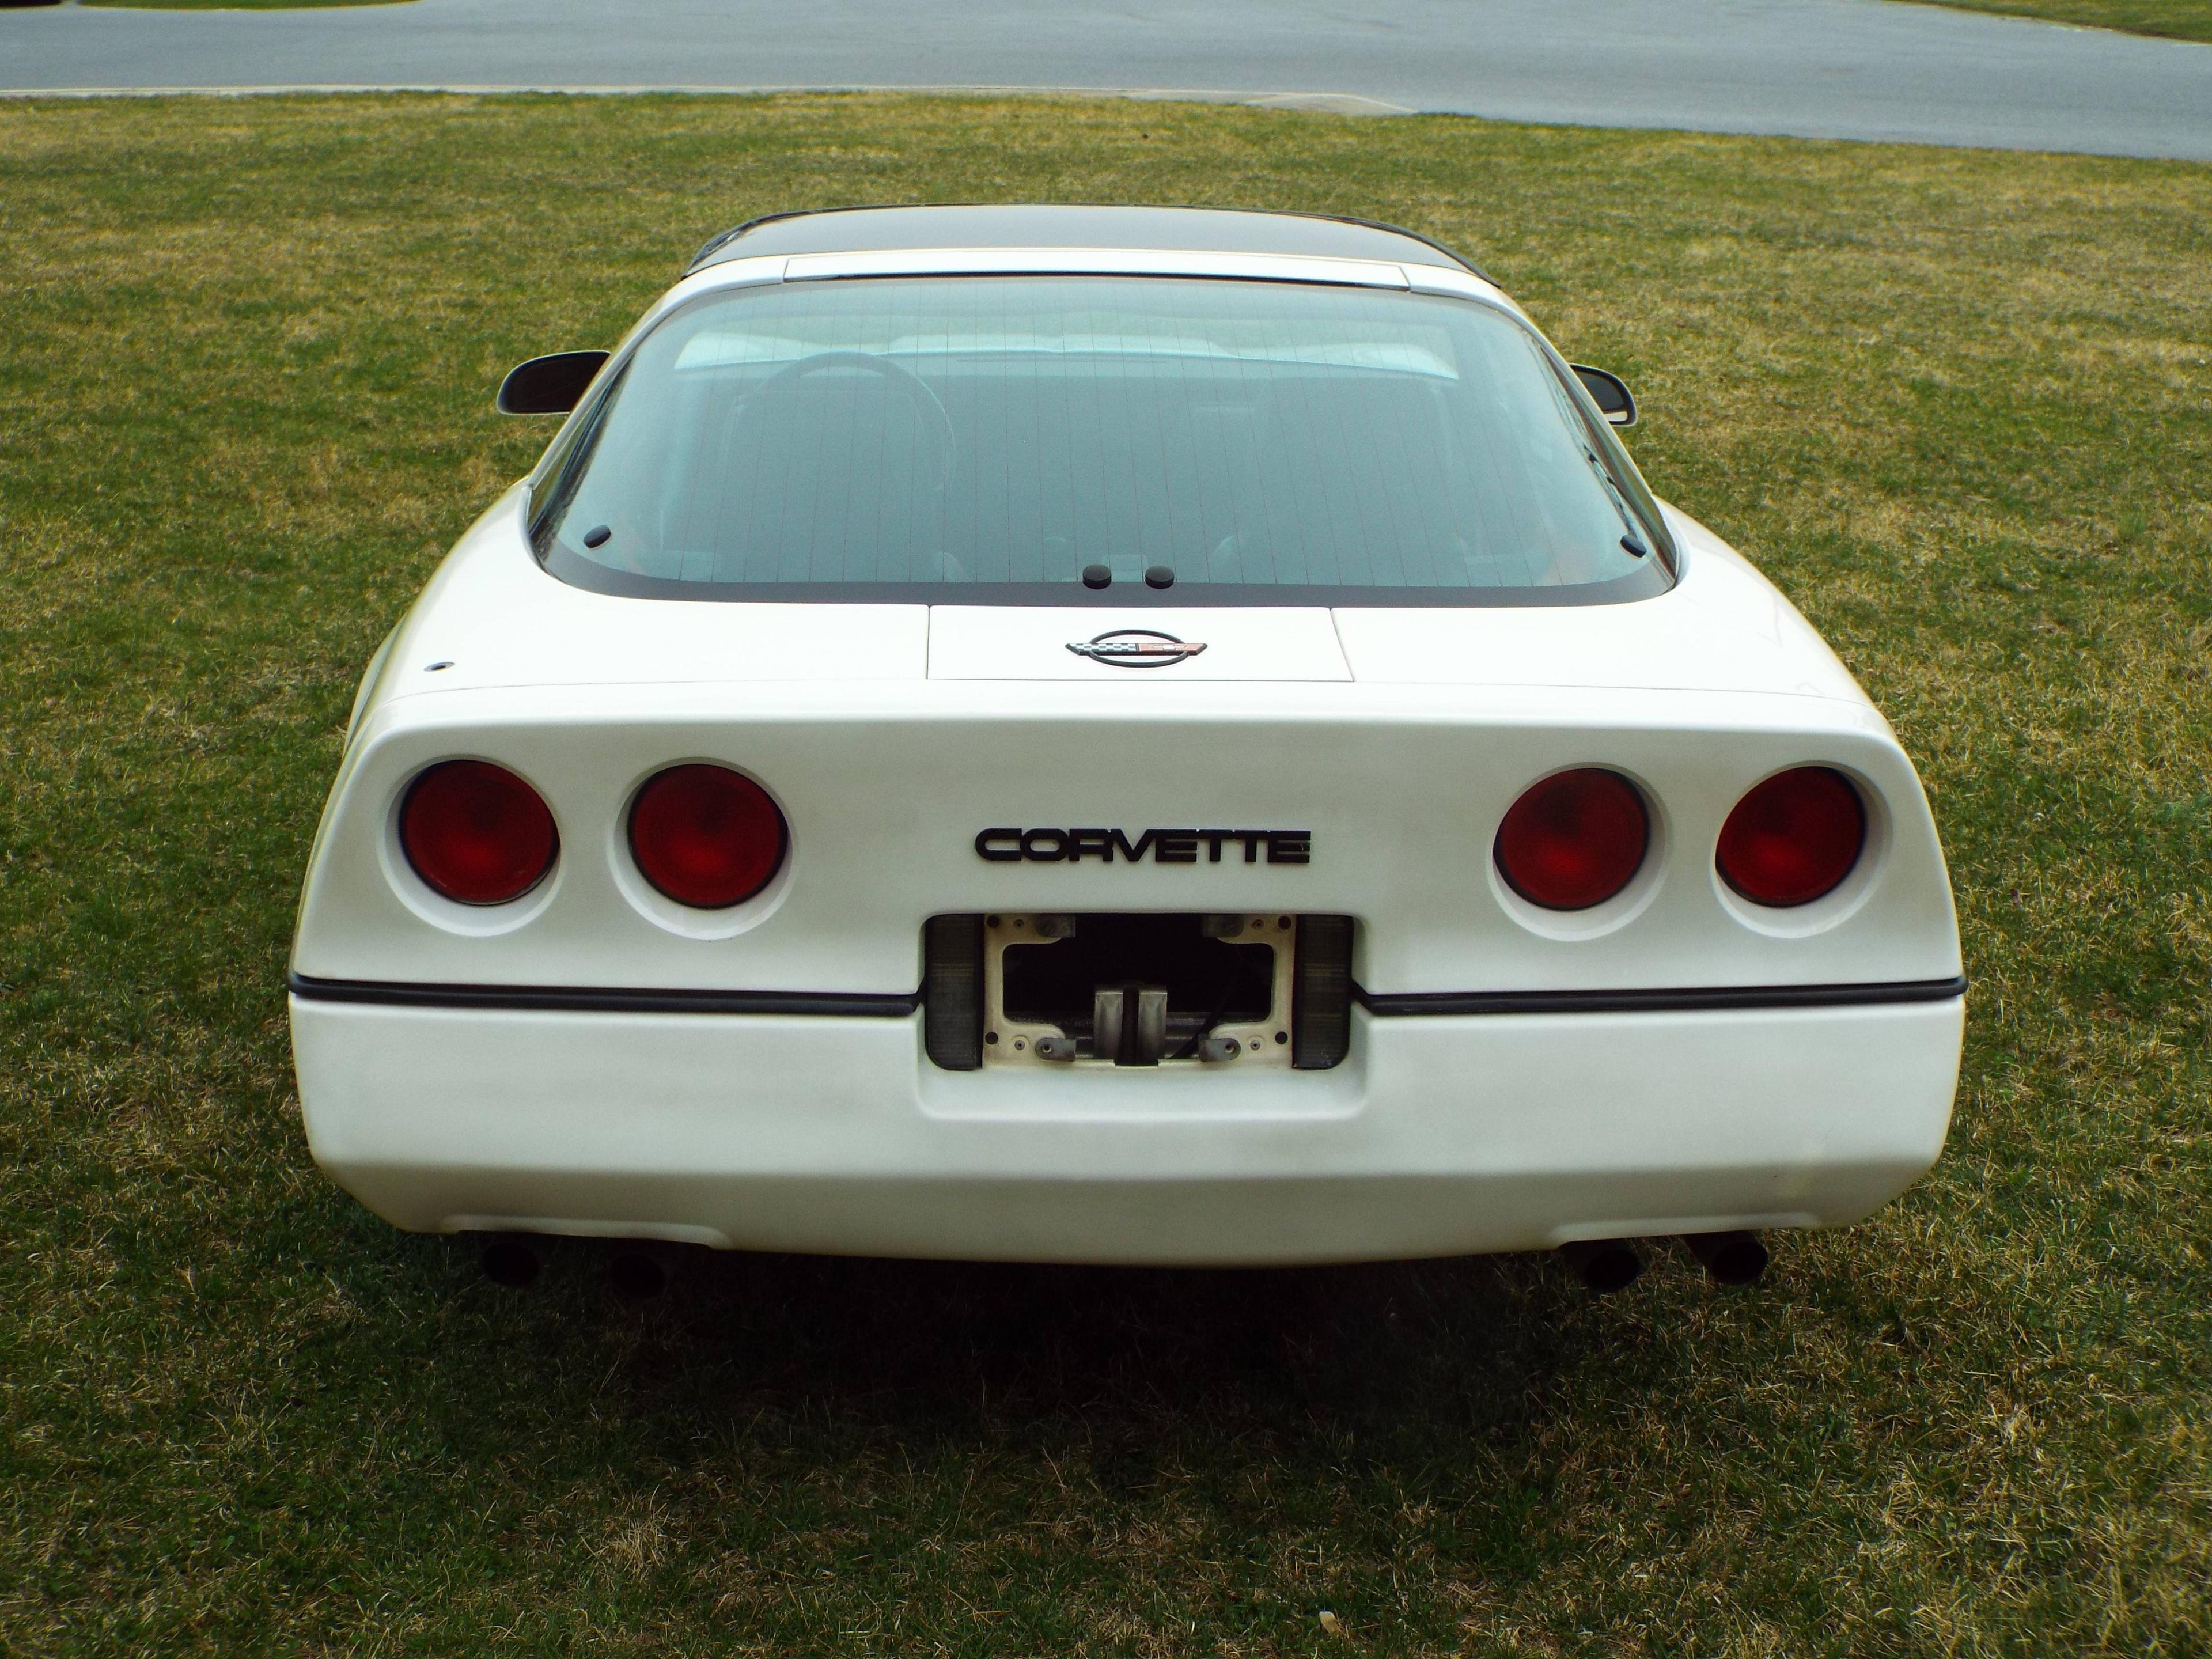 1985 Chevrolet Corvette Coupe. Runs strong. Would make a great entry level